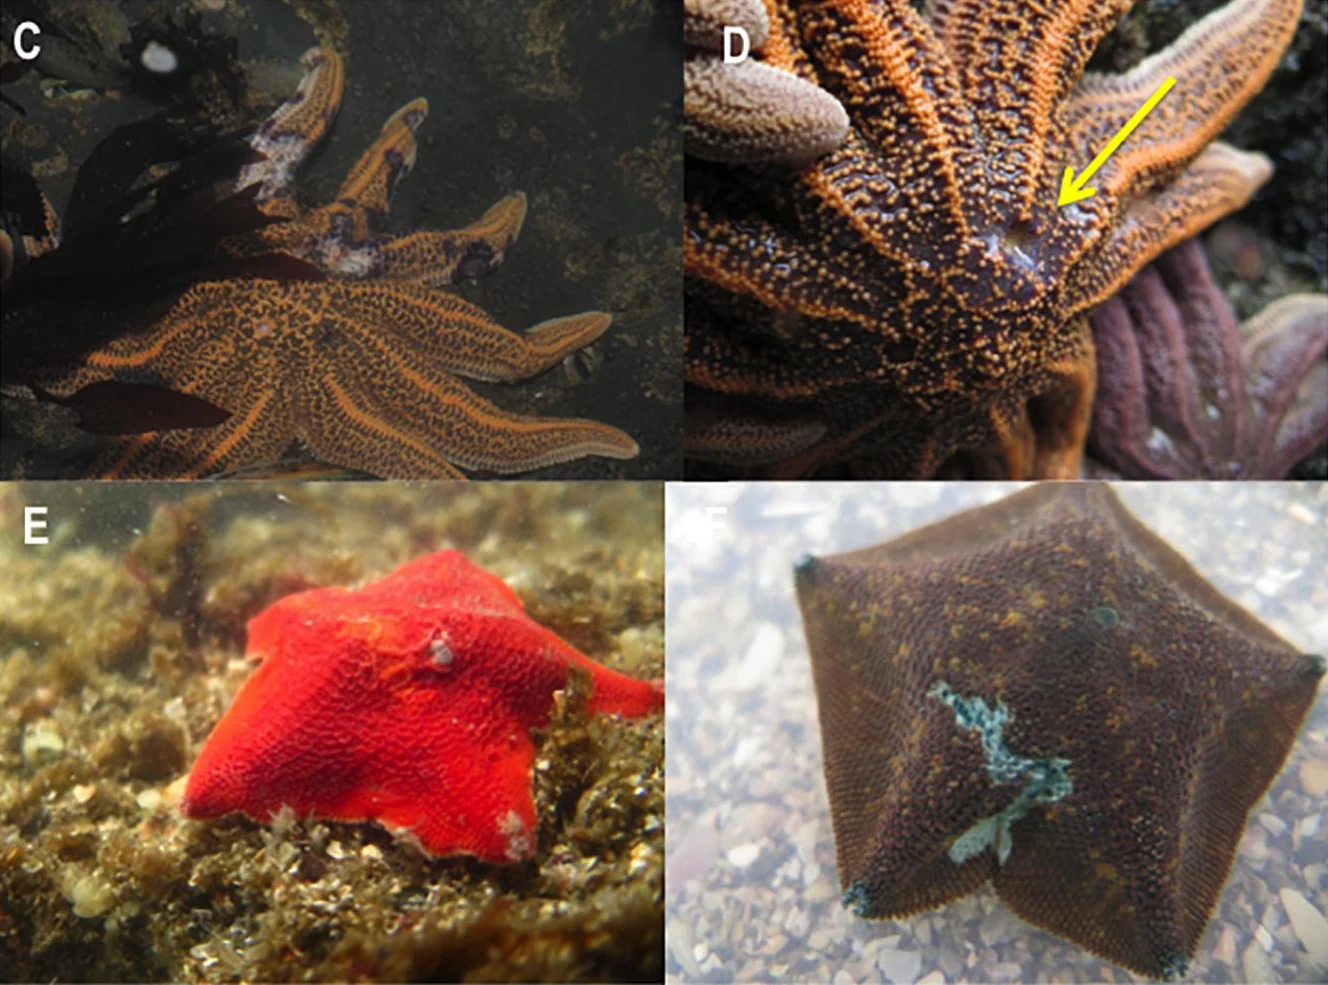 Mysterious Syndrome Turning Sea Stars Into Goo Reveals Another Strange Twist 1